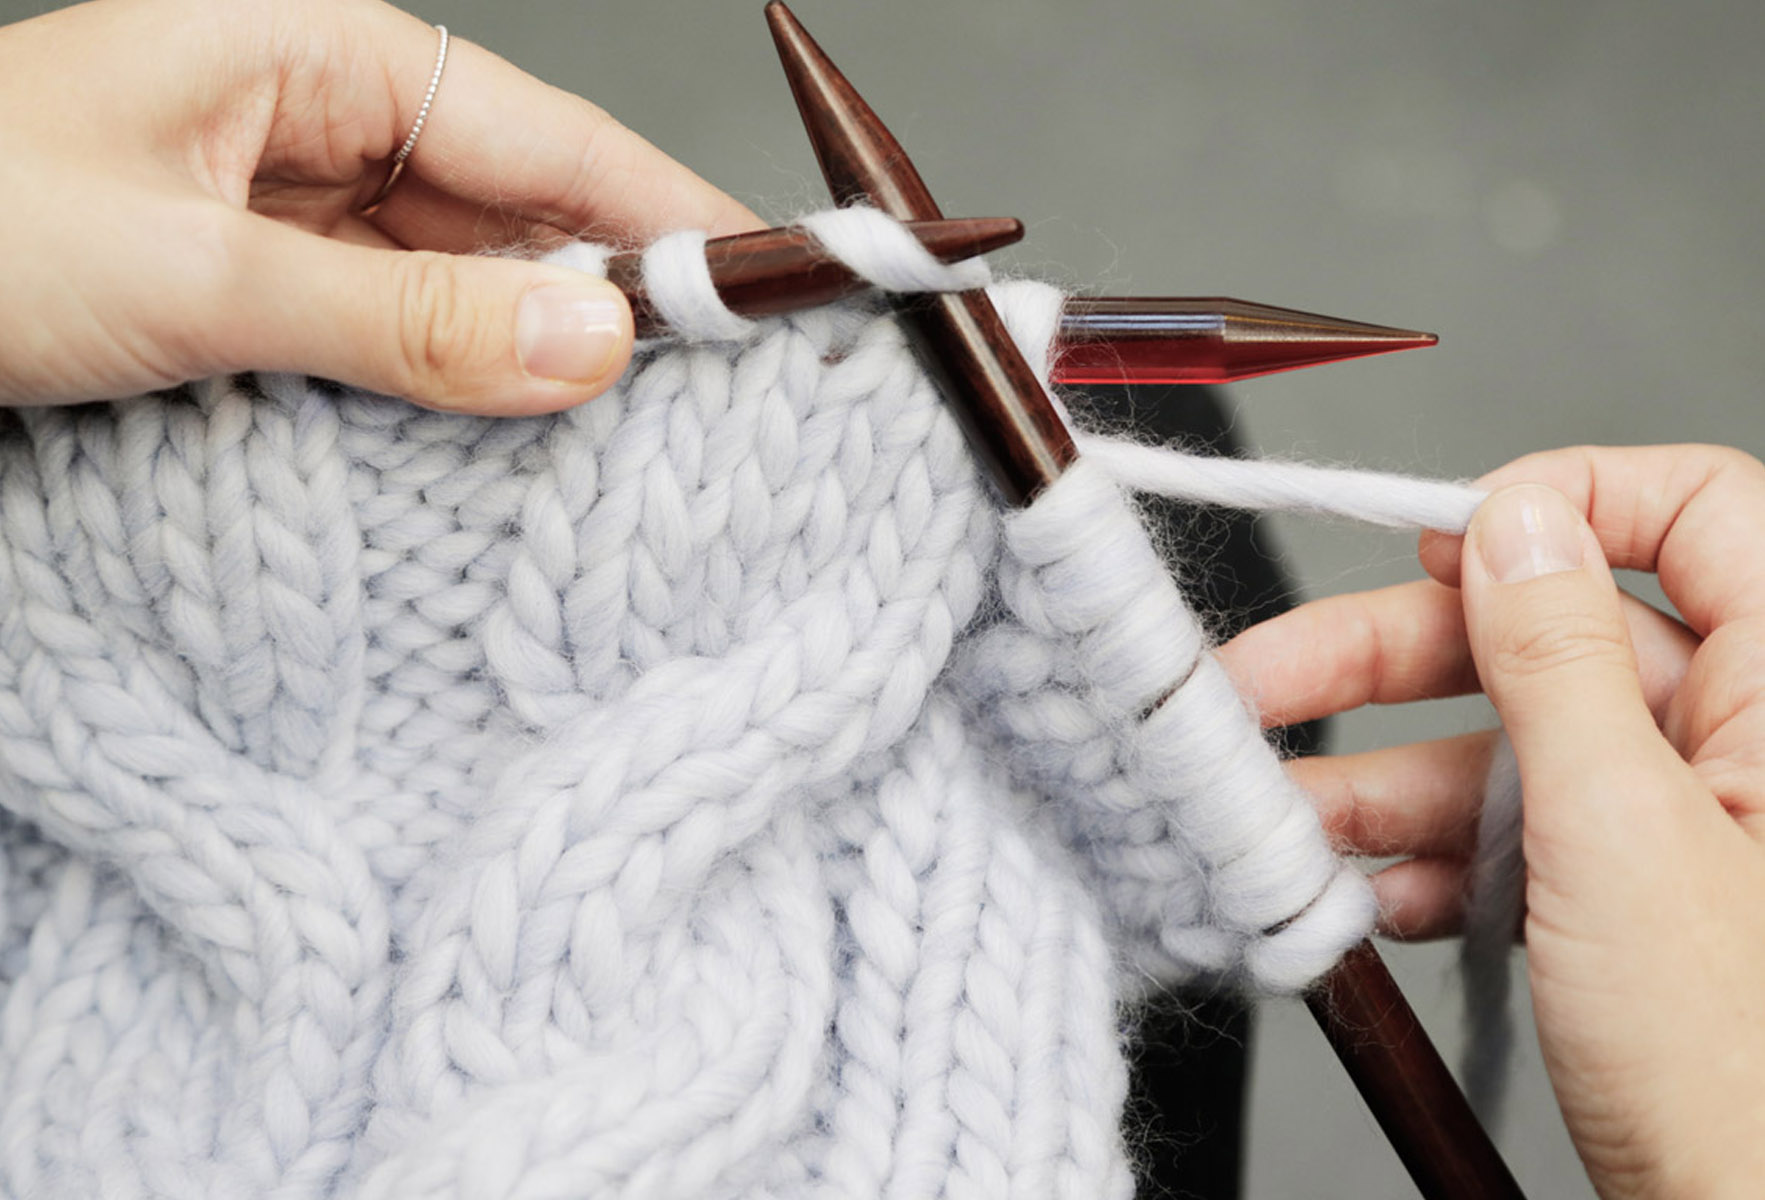 How to Cable  Diy knitting, Cable knitting, Loom knitting